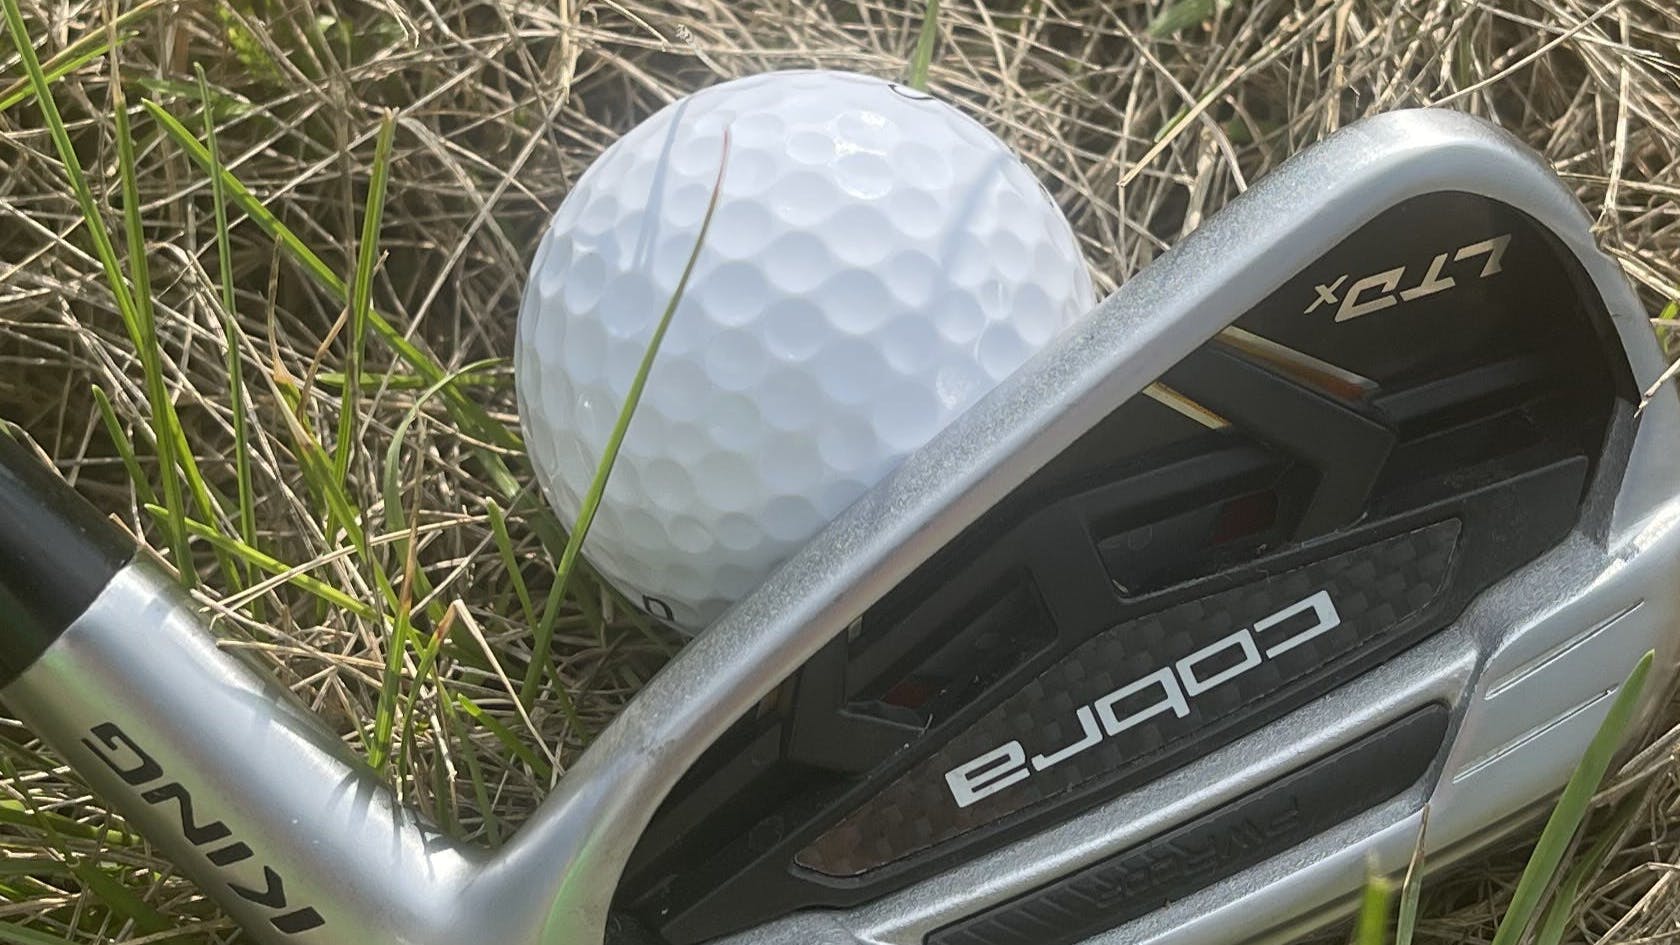 The Cobra LTDx Iron in front of a golf ball.